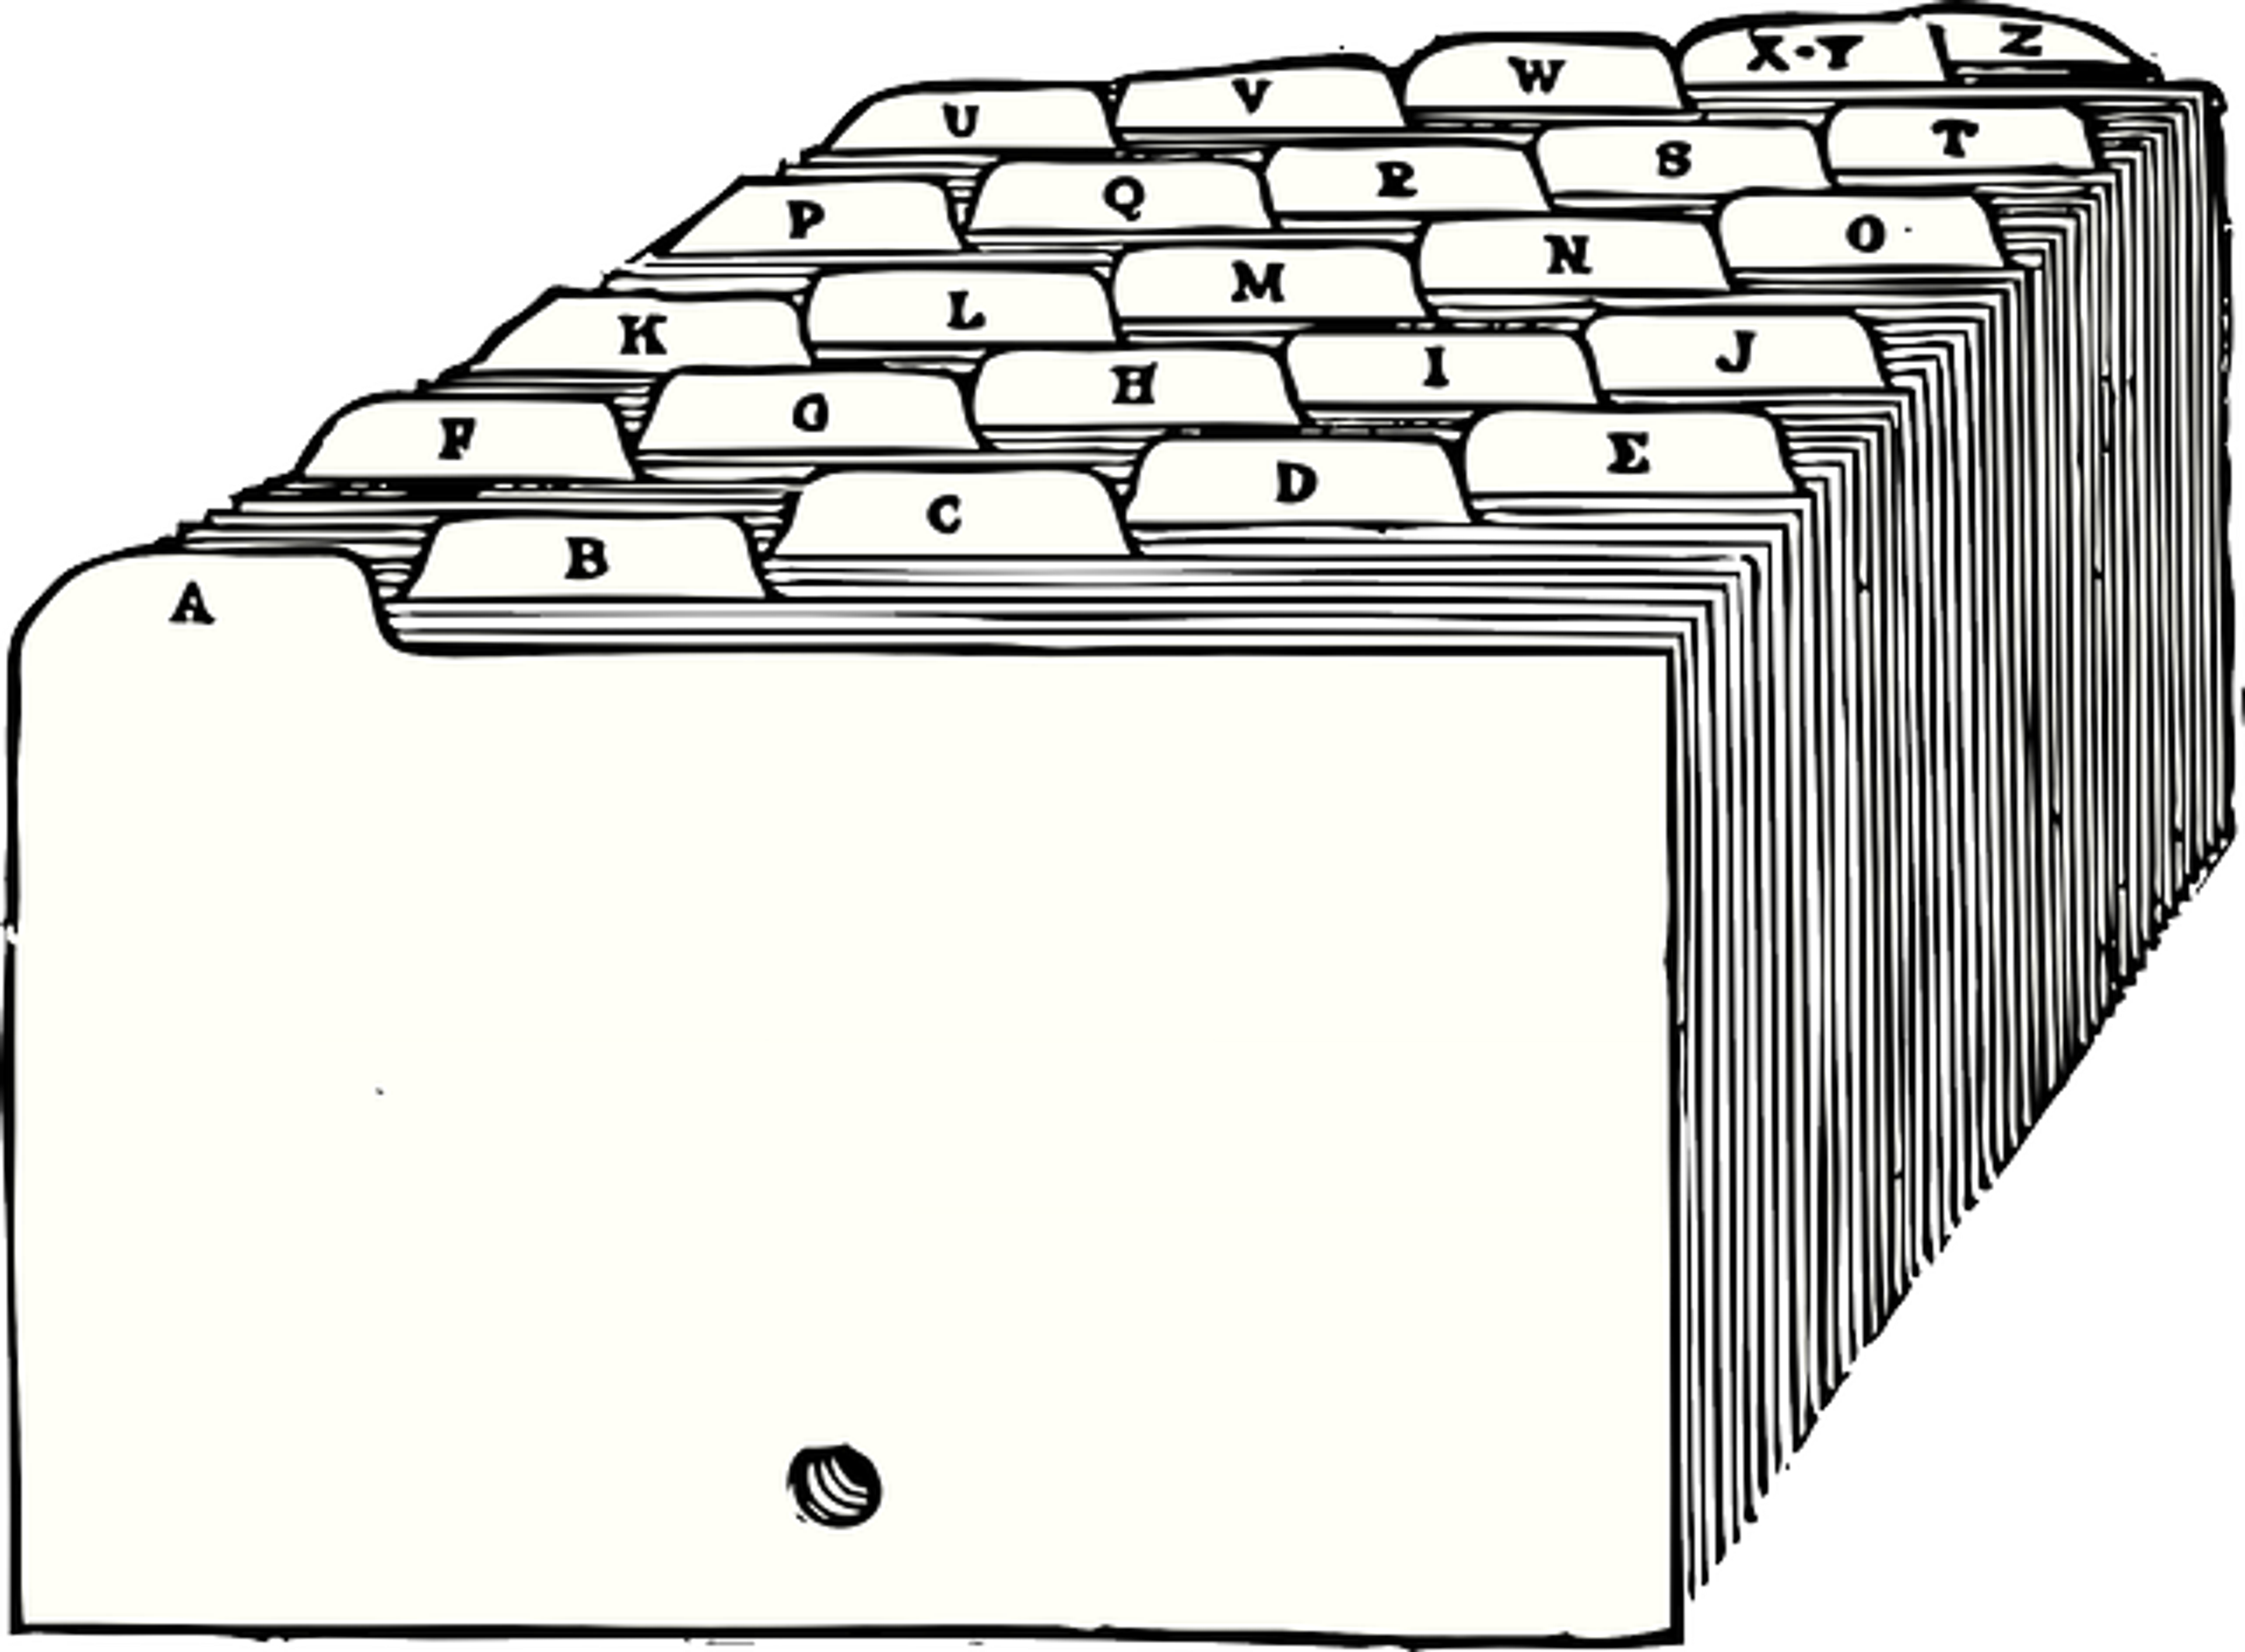 An image of files